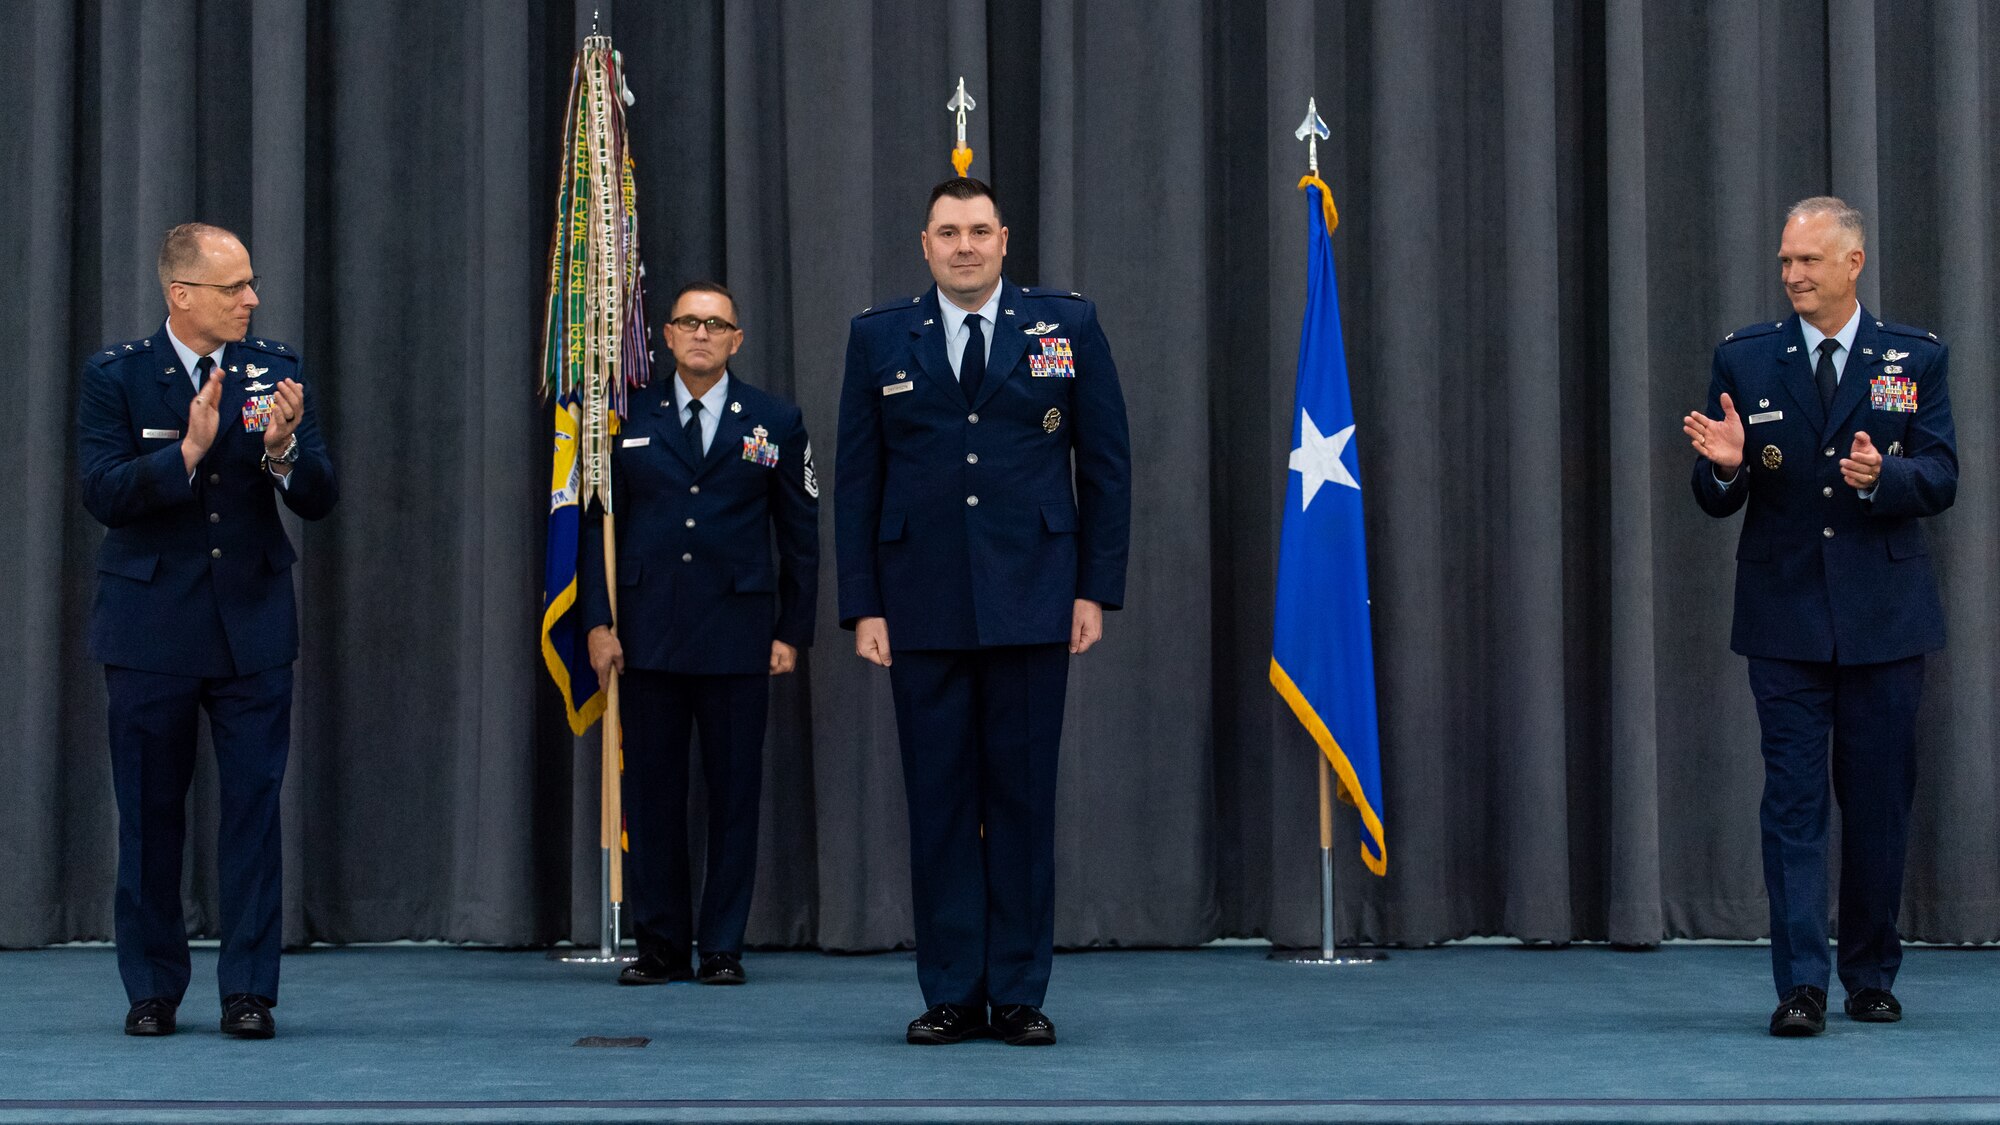 Maj. Gen. Mark E. Weatherington, left, 8th Air Force and Joint-Global Strike Operations Center commander, and Col. Michael A. Miller, right, outgoing 2nd Bomb Wing commander, congratulate Col. Mark C. Dmytryszyn, middle, incoming 2nd BW commander, during a change of command ceremony at Barksdale Air Force Base, La., July 23, 2020. A change of command is a military tradition that represents a formal transfer of authority and responsibility for a unit from one commanding or flag officer to another. (U.S. Air Force photo by Airman 1st Class Jacob B. Wrightsman)